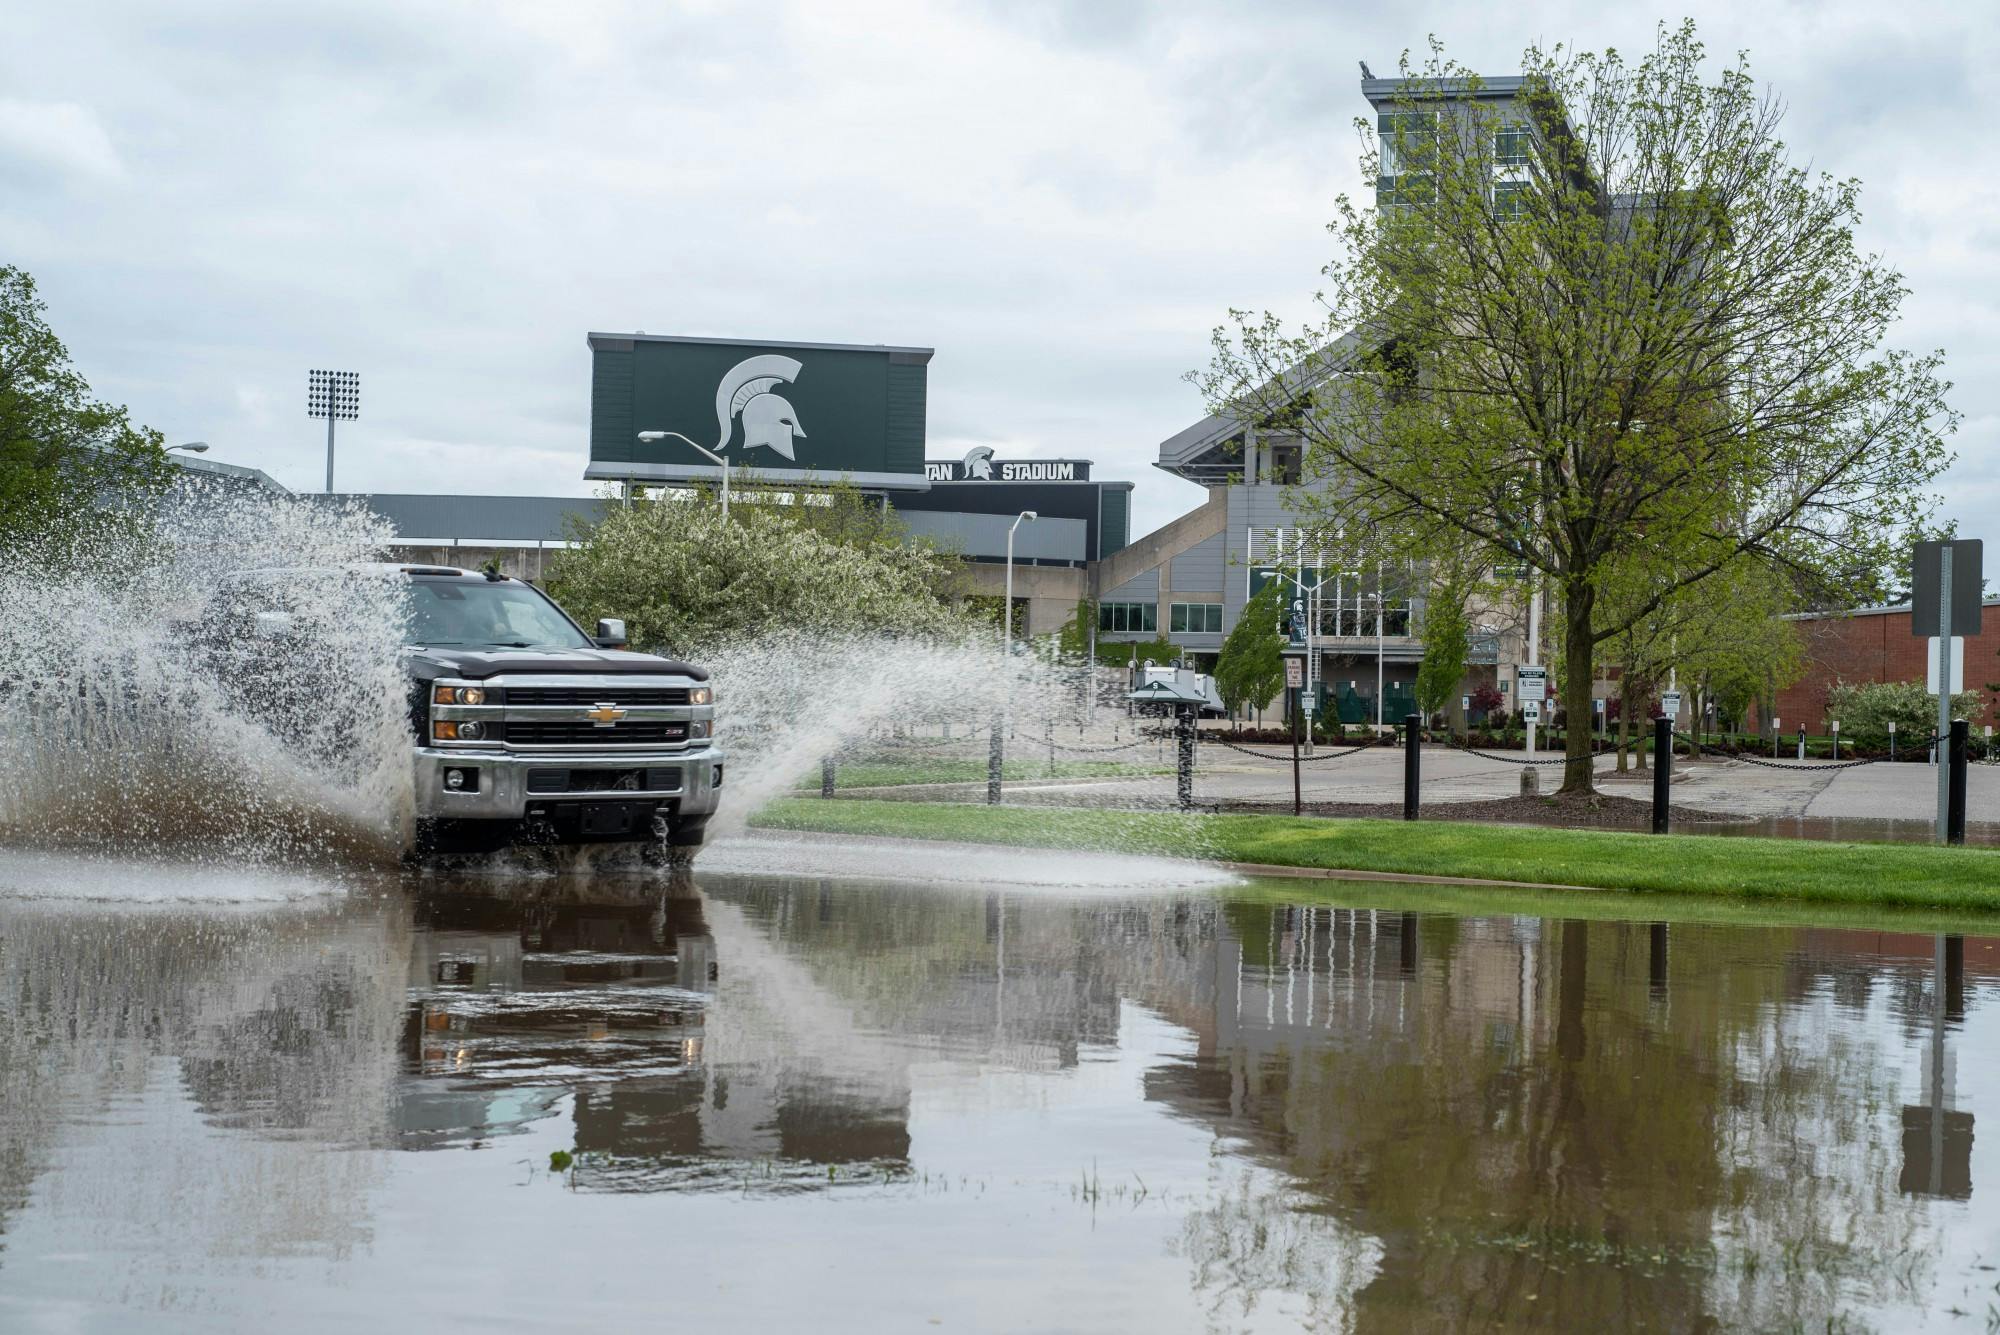 A car drives past Spartan Stadium on March 19, 2020